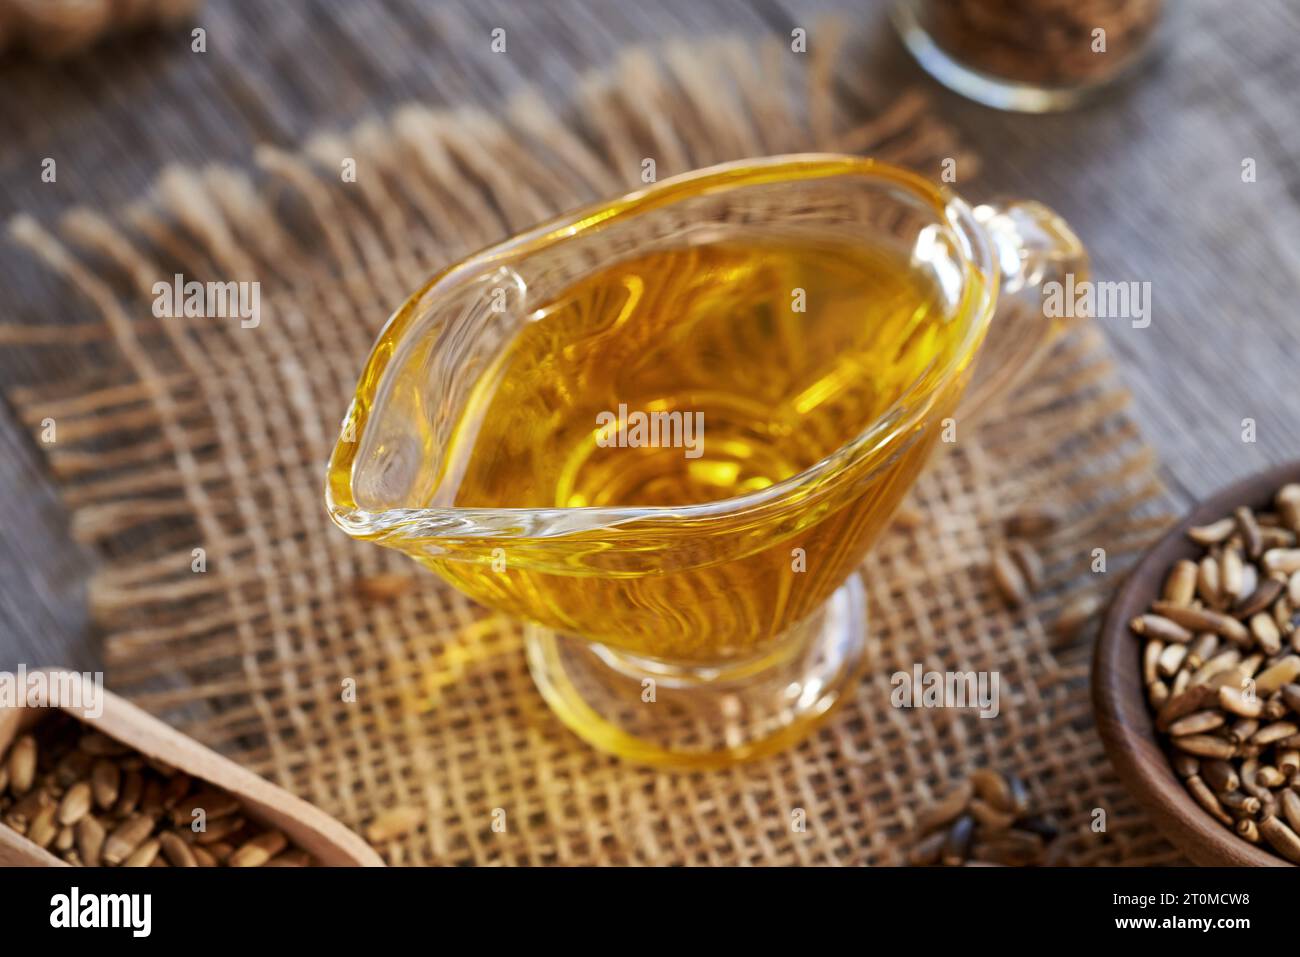 Milk thistle oil in a glass jug with Carduus marianus seeds Stock Photo